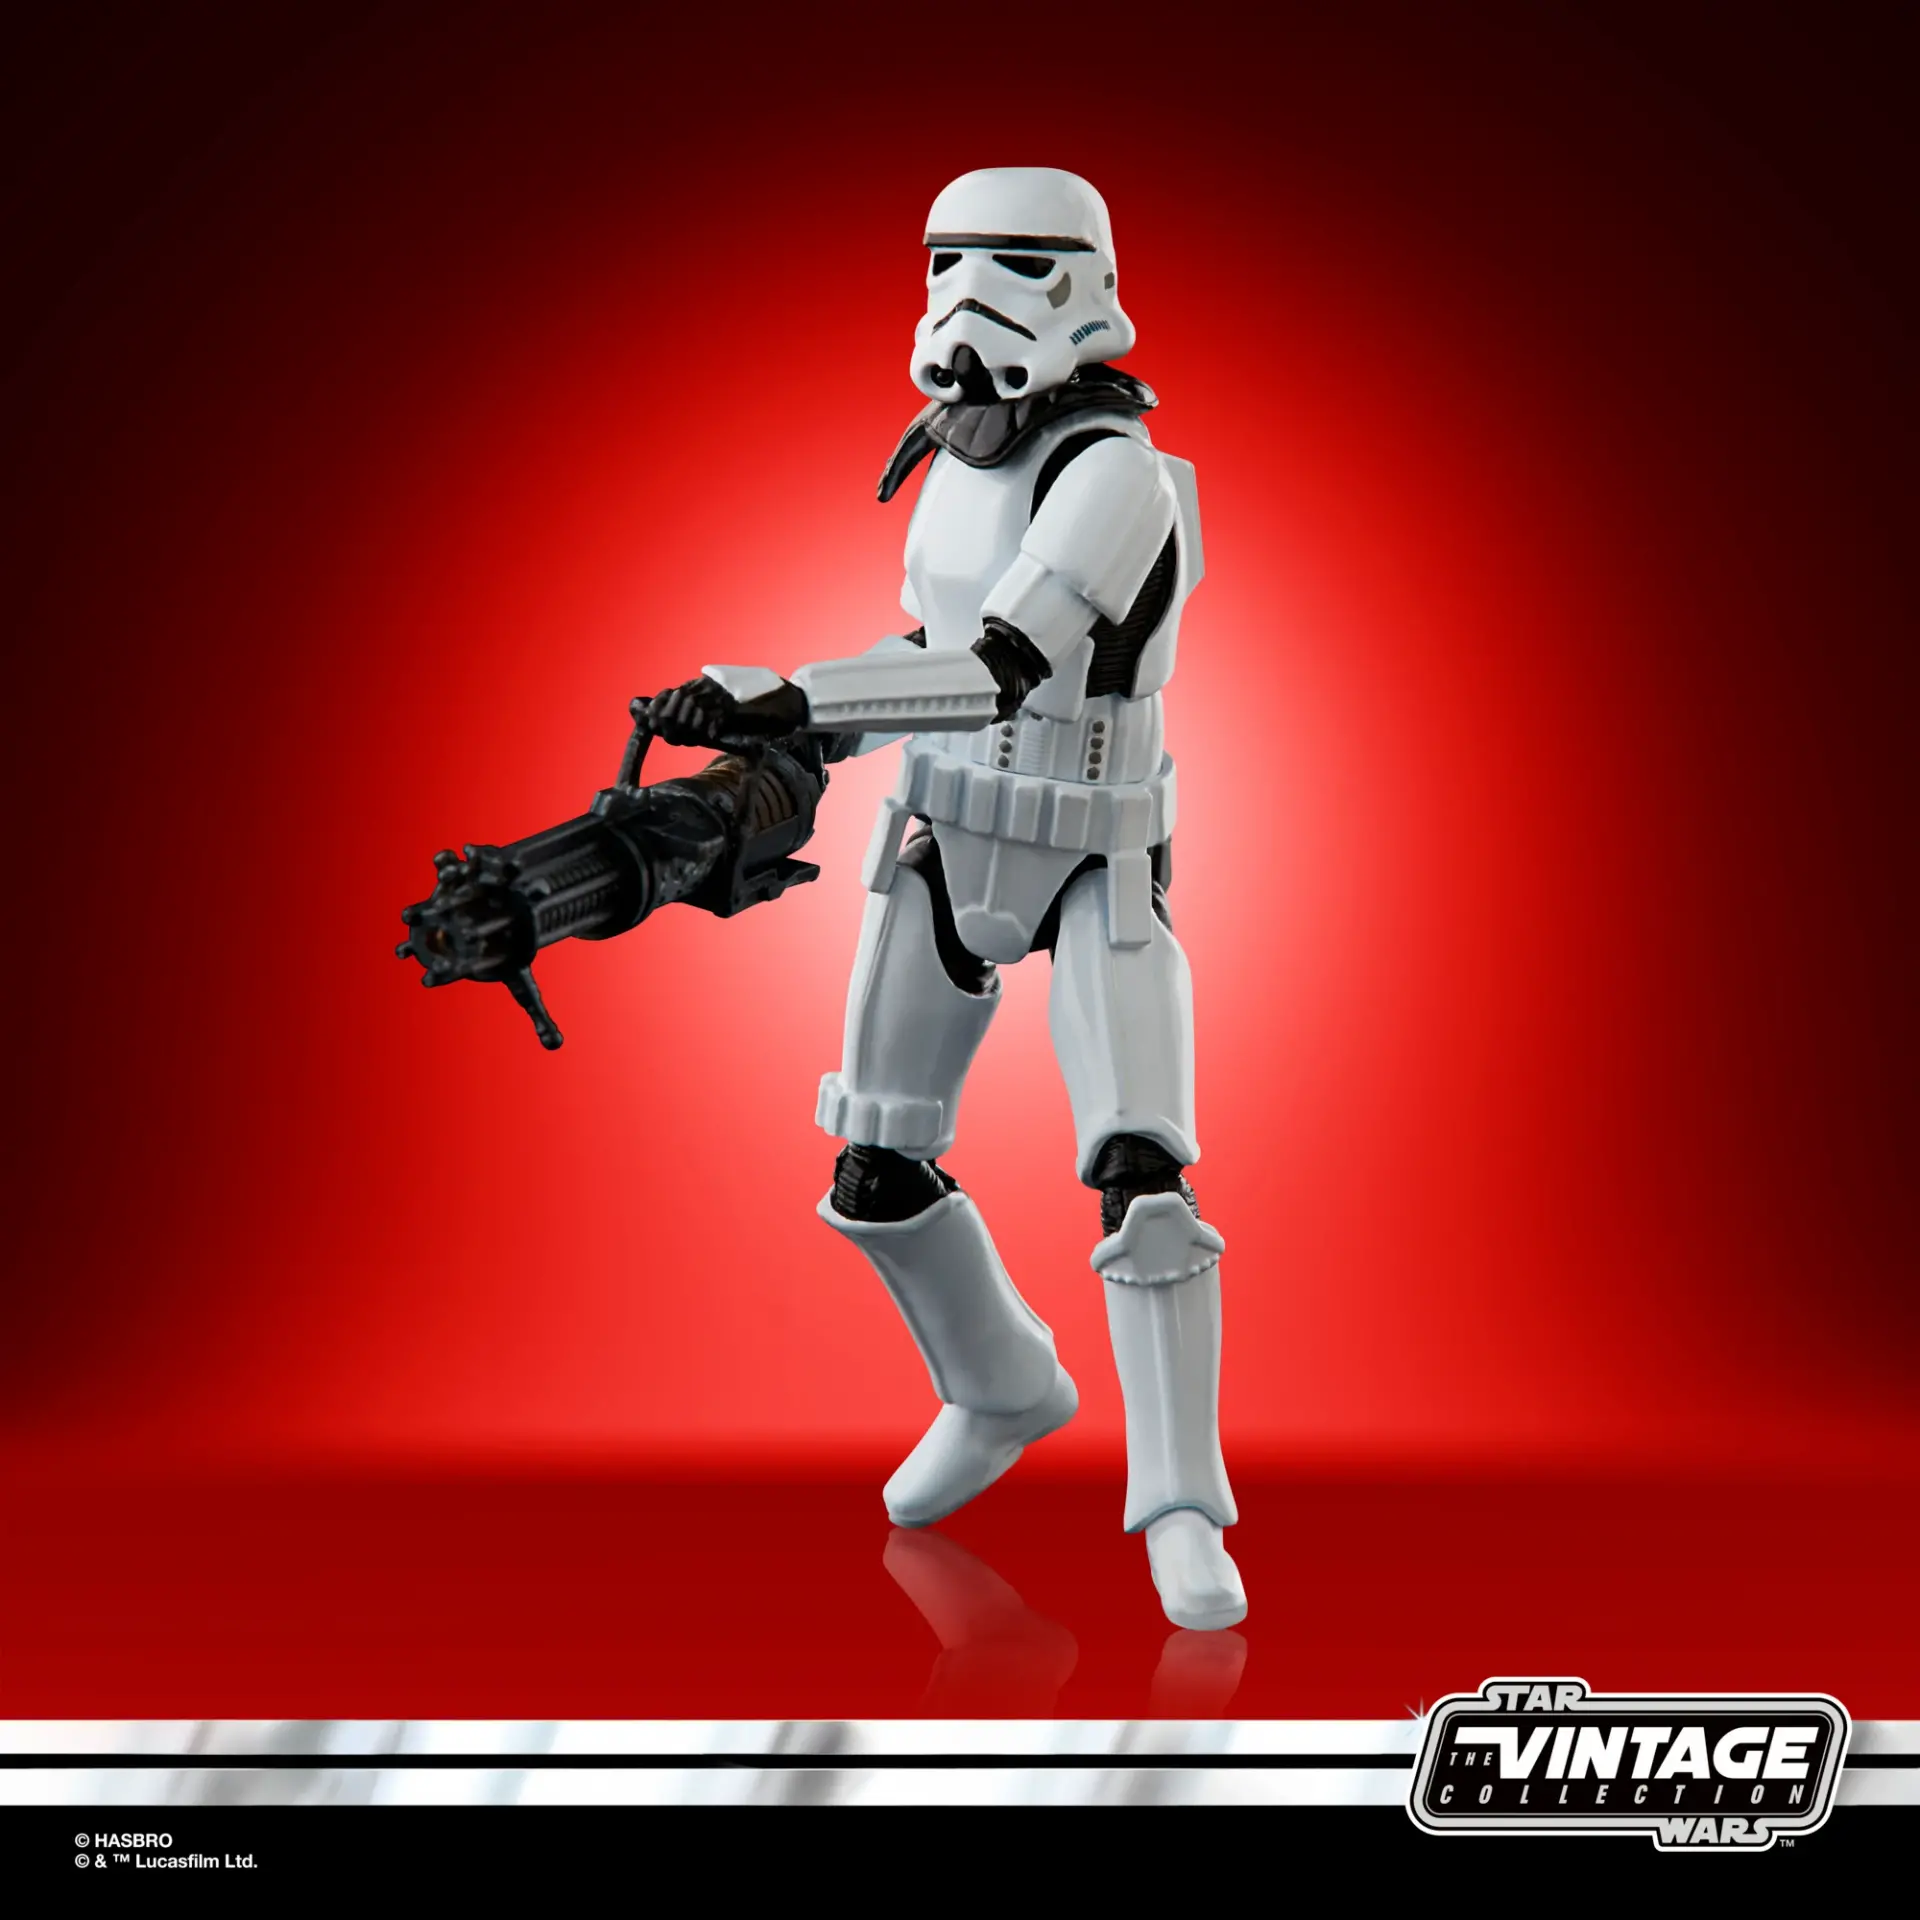 Star wars the vintage collection gaming greats heavy assault stormtrooper jawascave 1